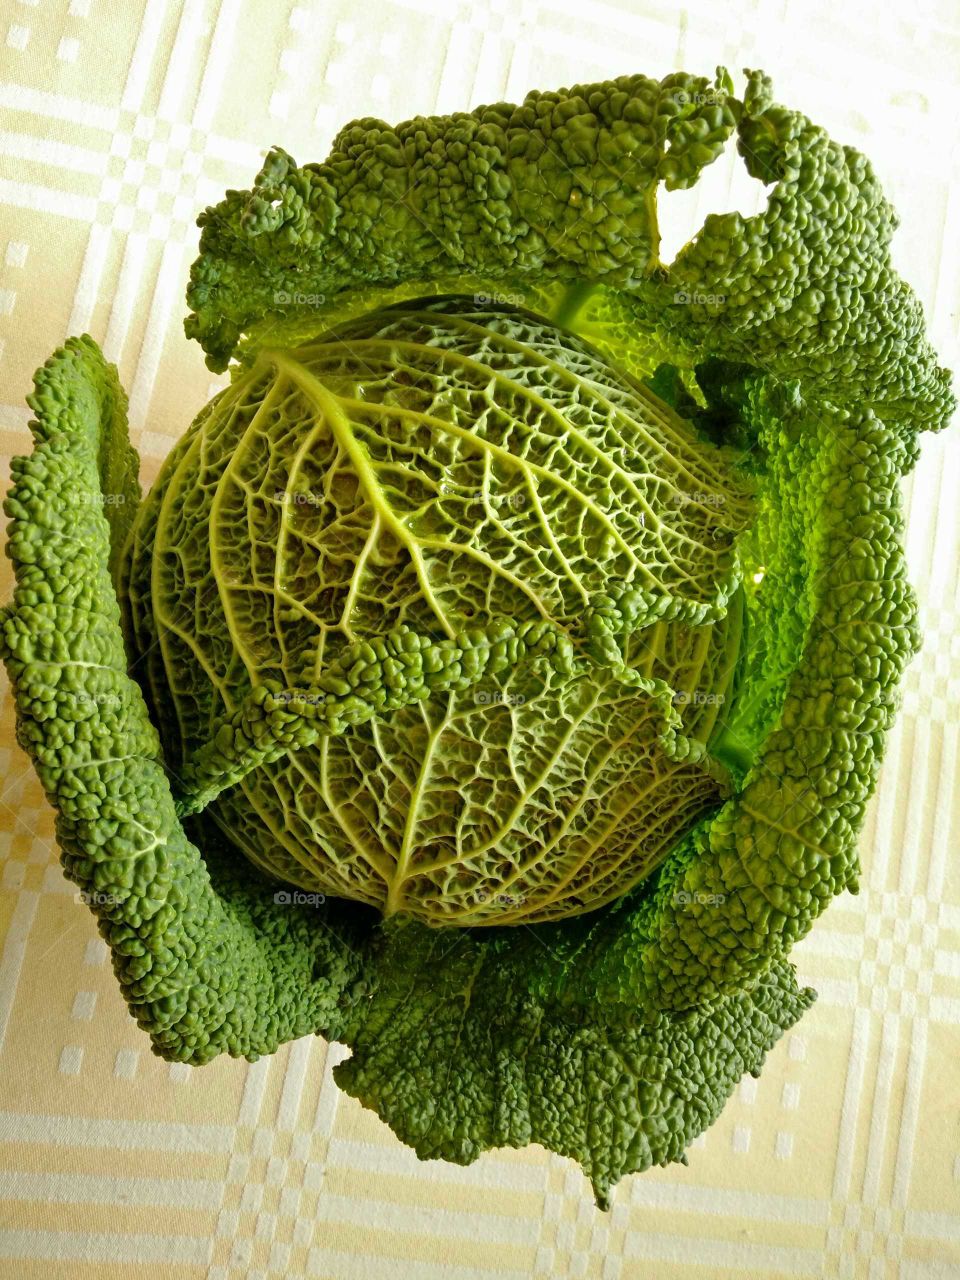 An amazing savoy cabbage photographed in a street market stand exhibition